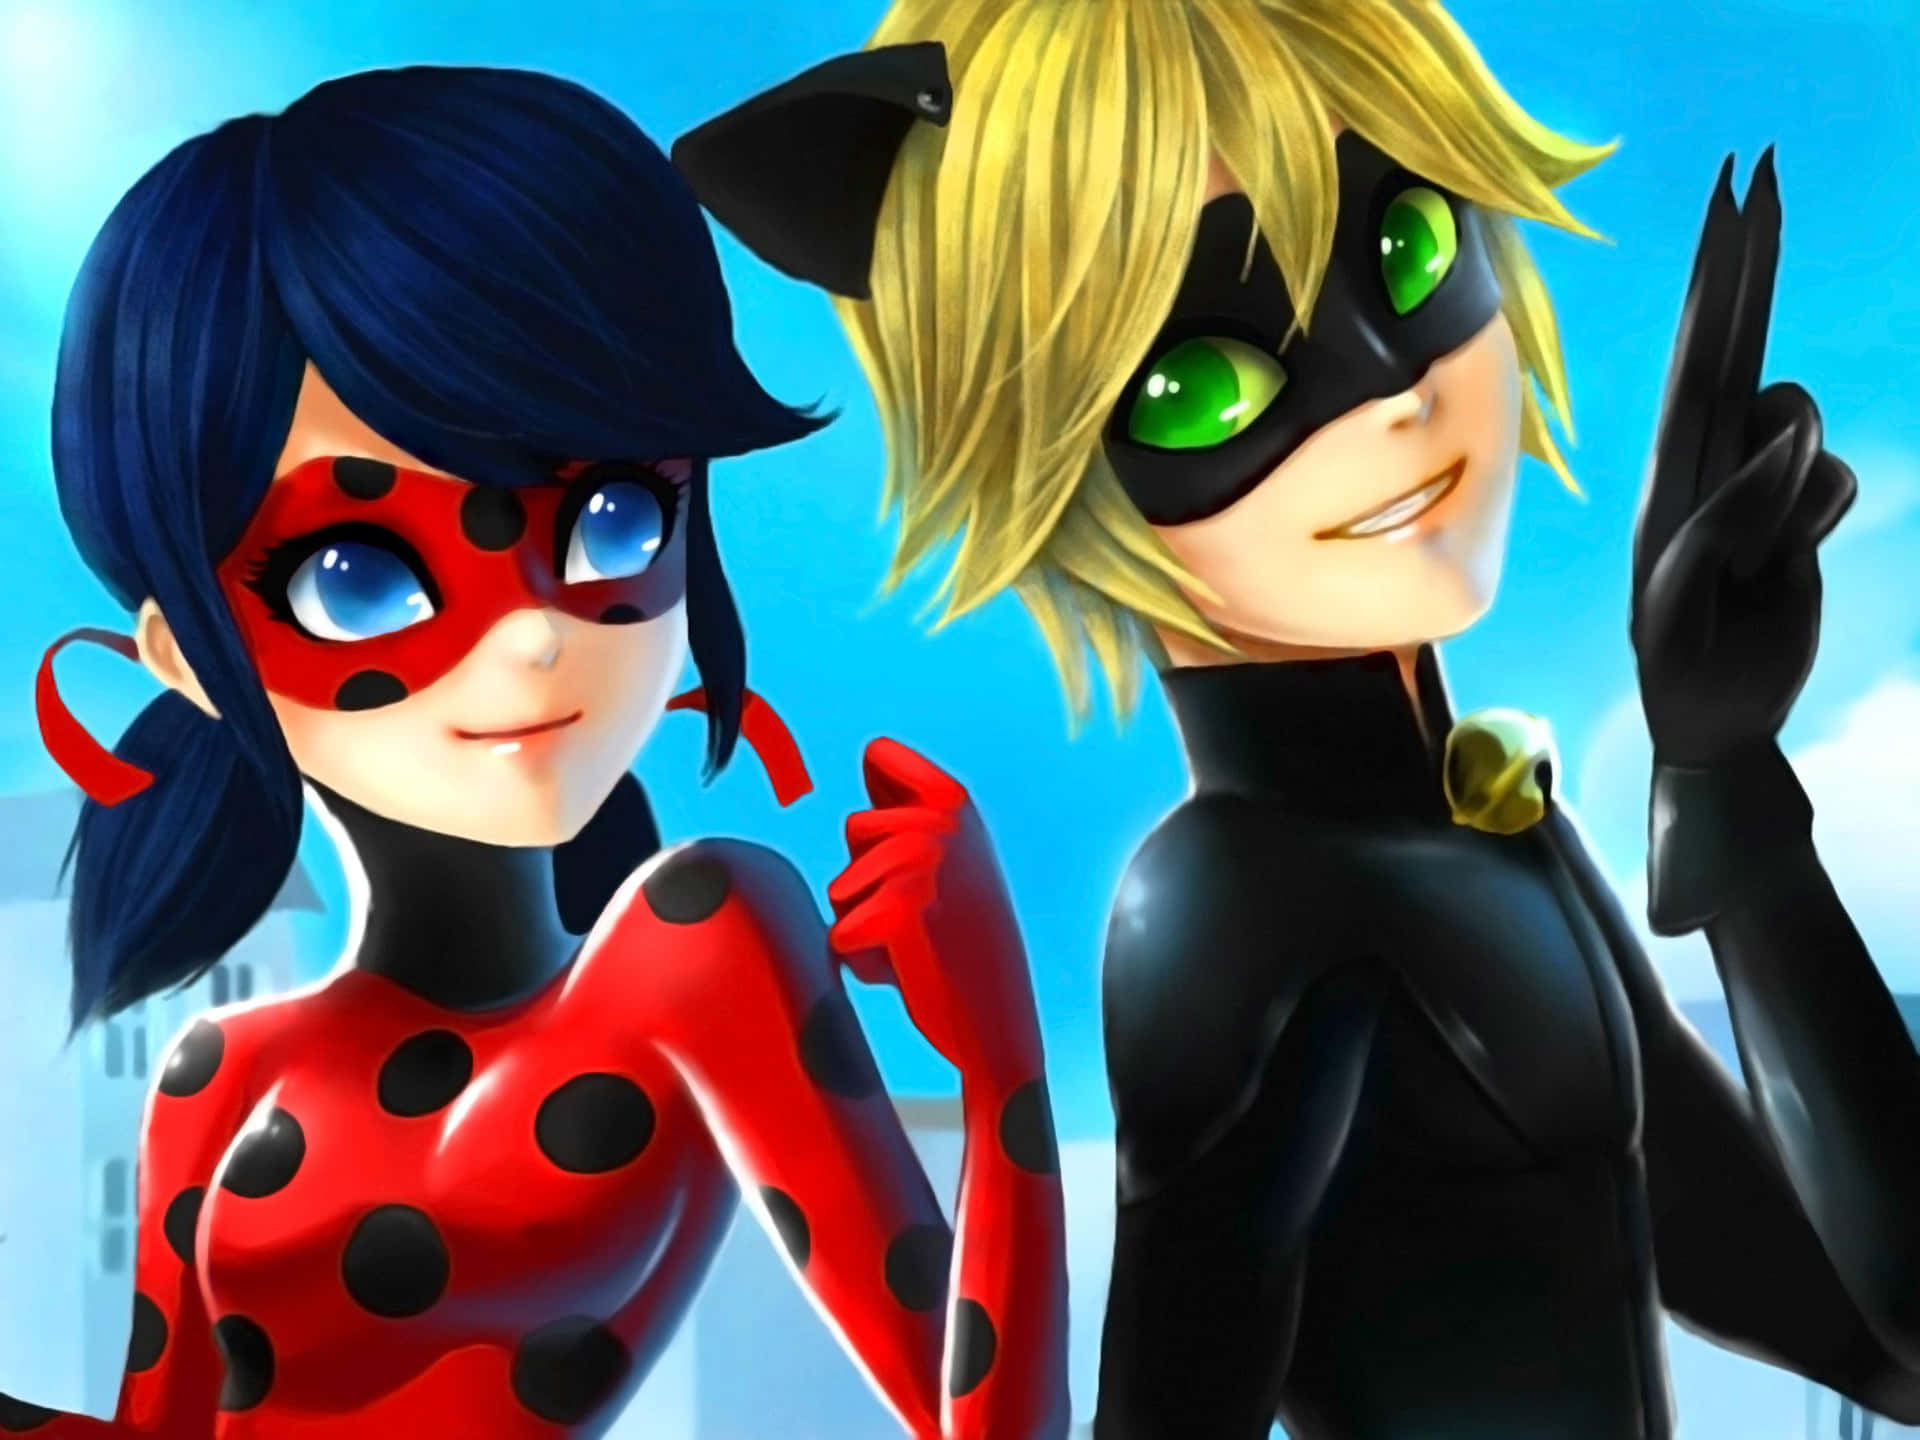 Ladybug and Cat Noir in Action!